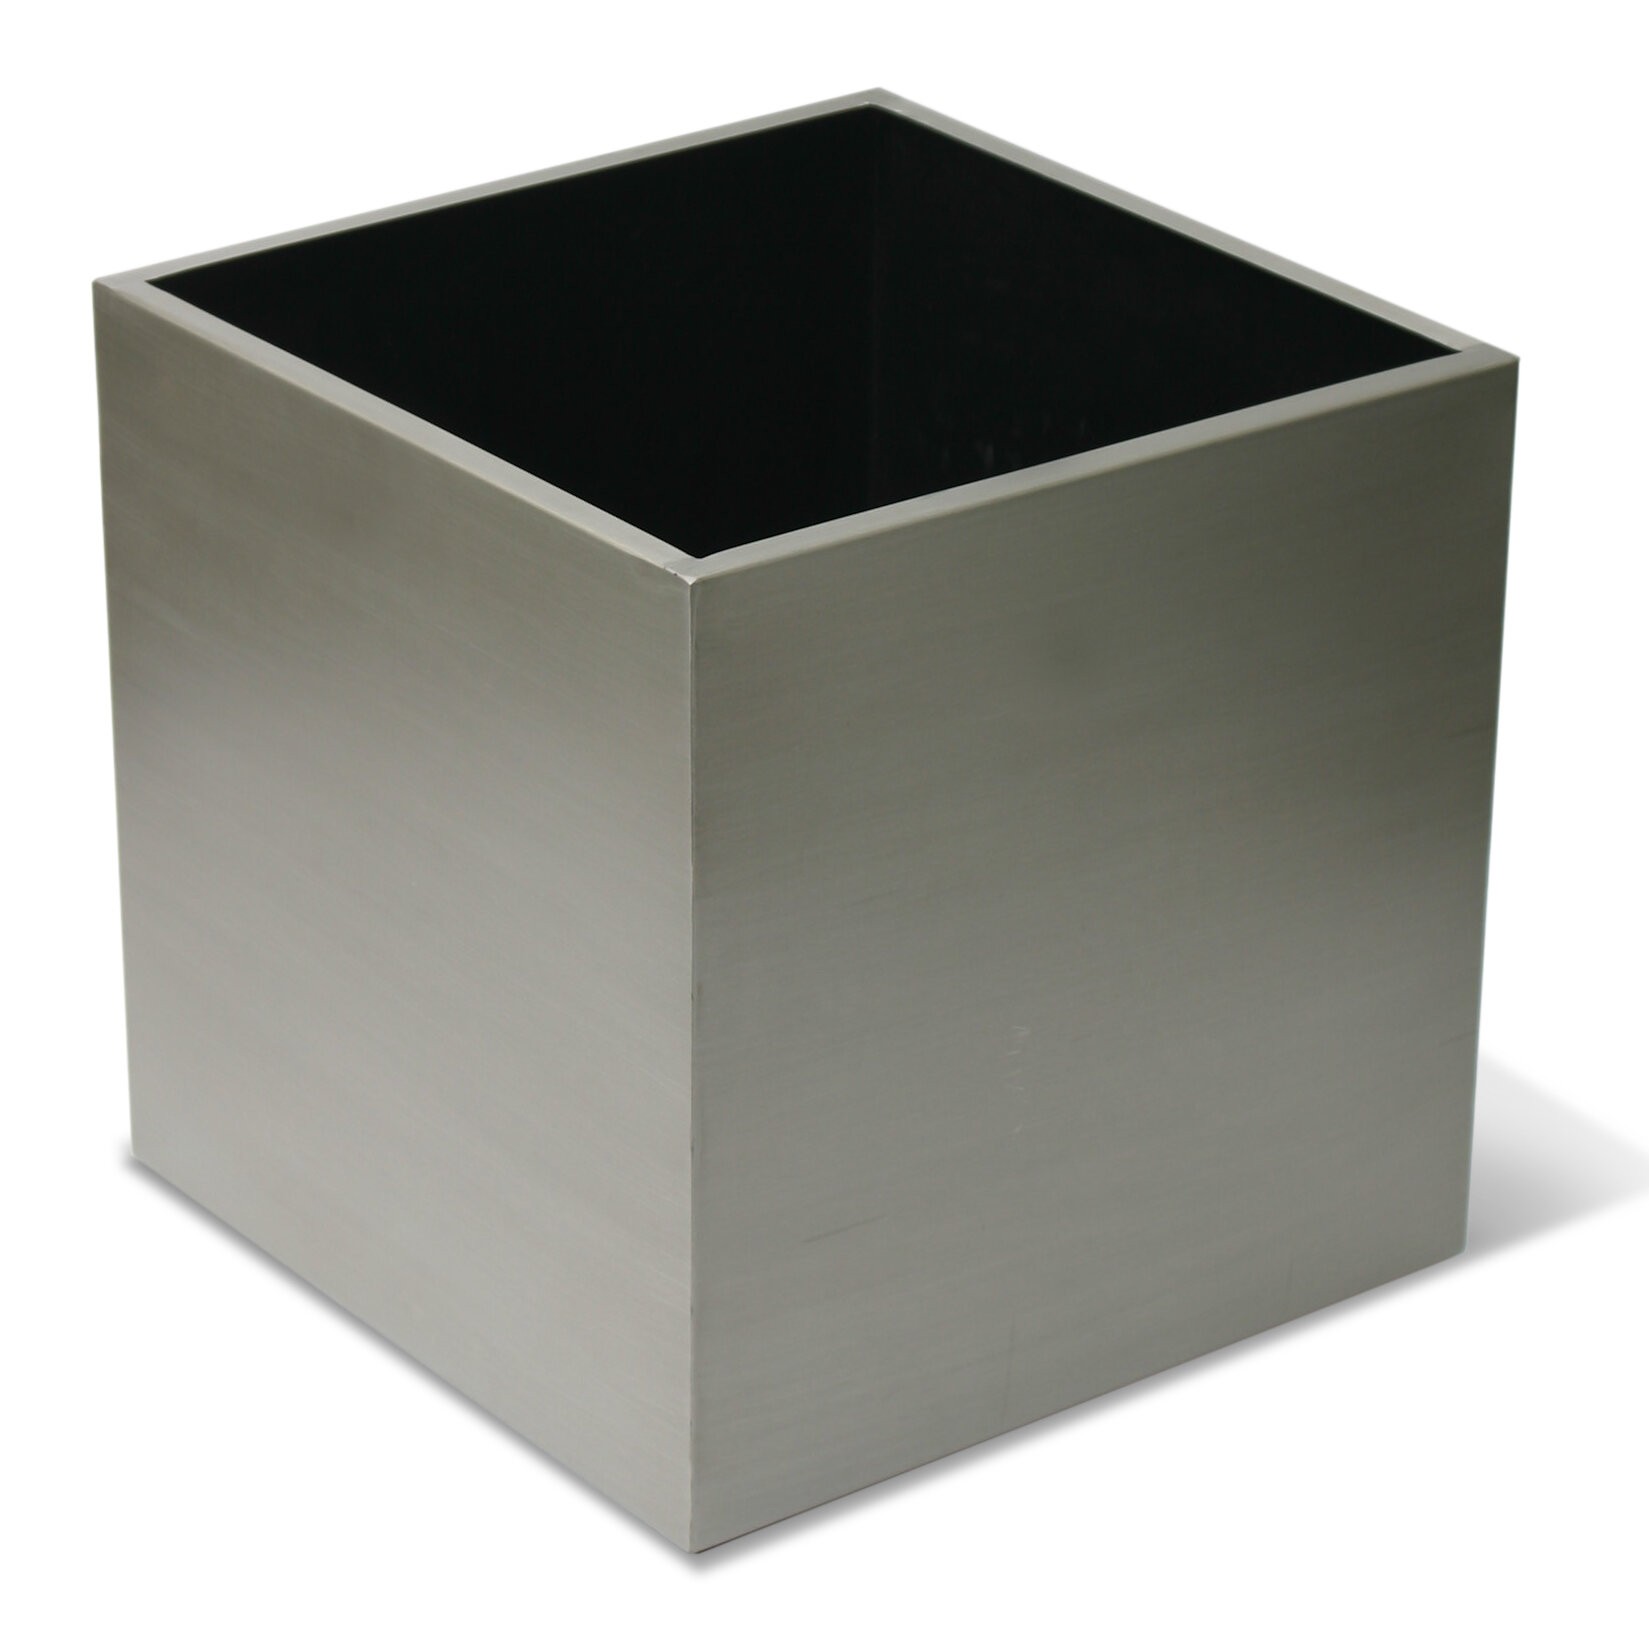 Stainless Steel Planter Box